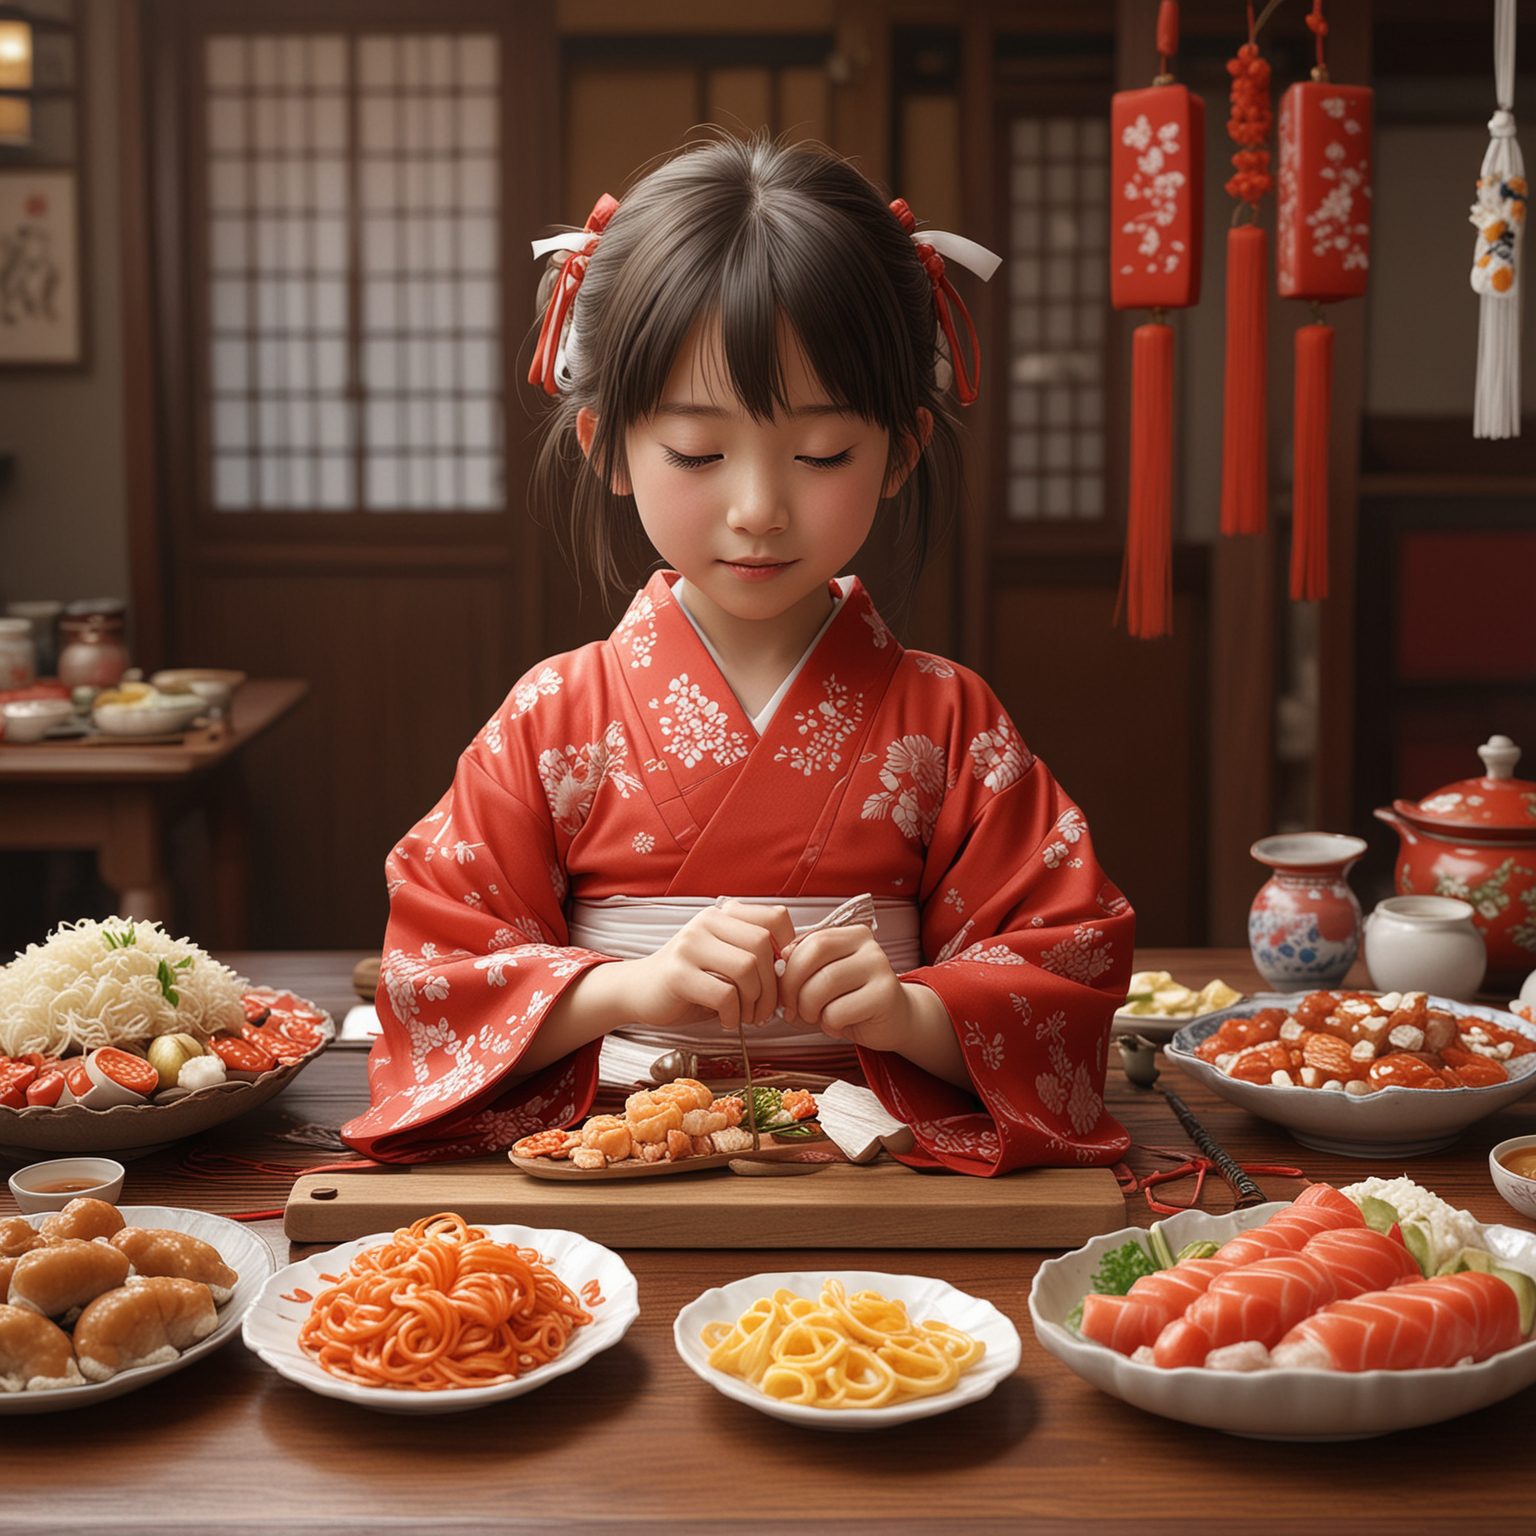 Spirited Away Anime Girl in Traditional Red Kimono with a Table of Sumptuous Food